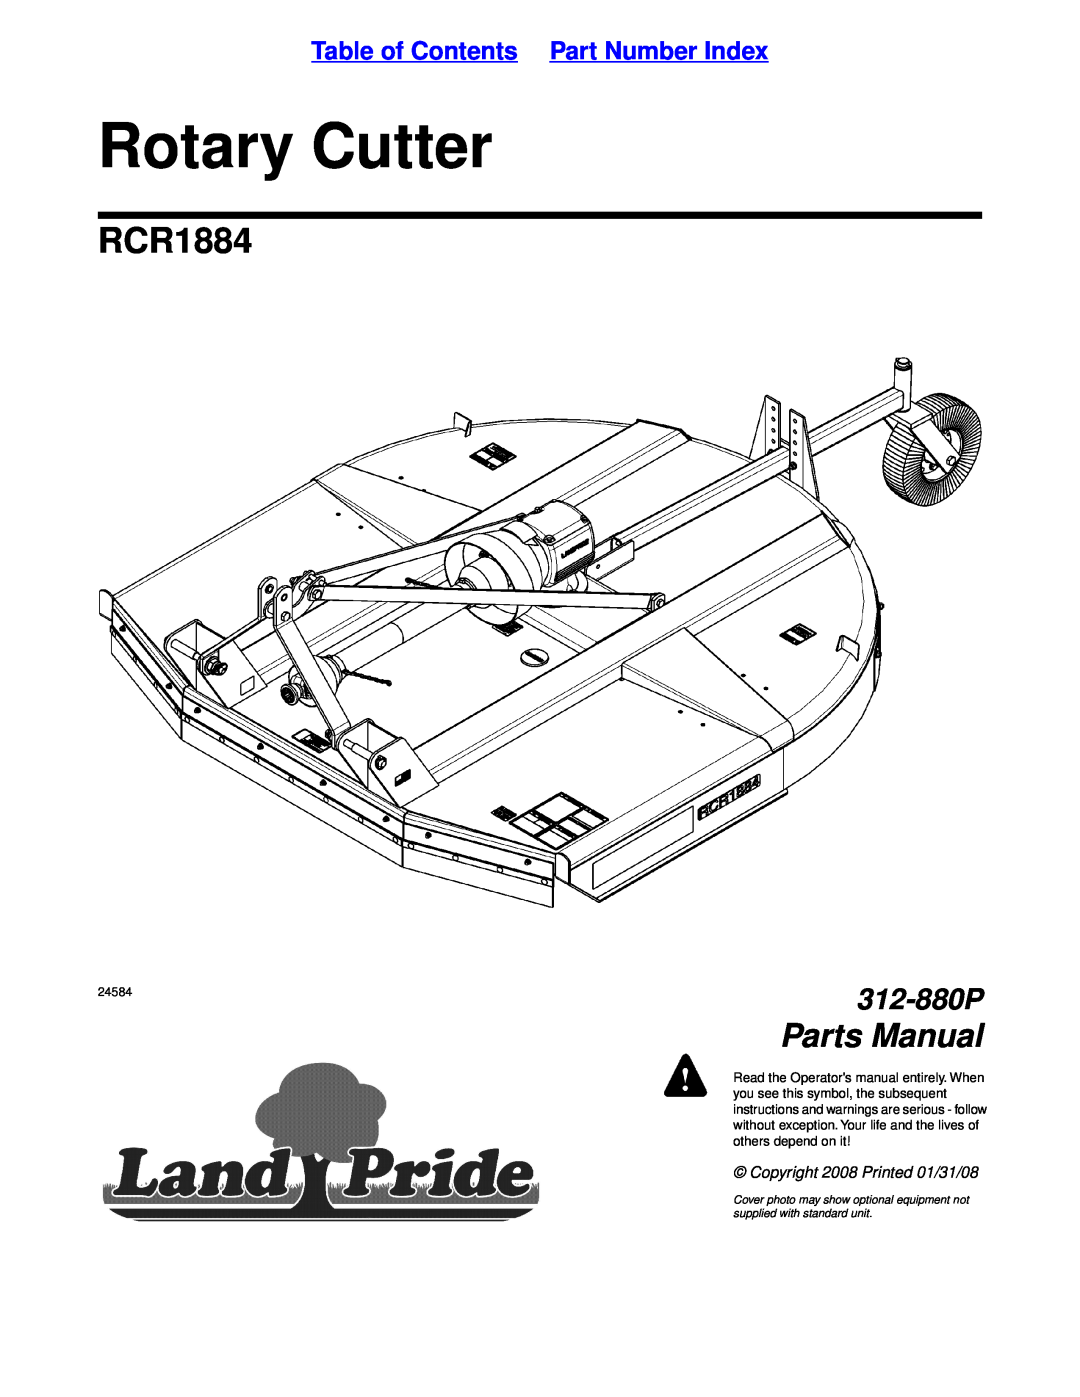 Land Pride manual RCR1884 Series, Operator’s Manual, Table of Contents, Rotary Cutters, 312-880M, 9/24/08 